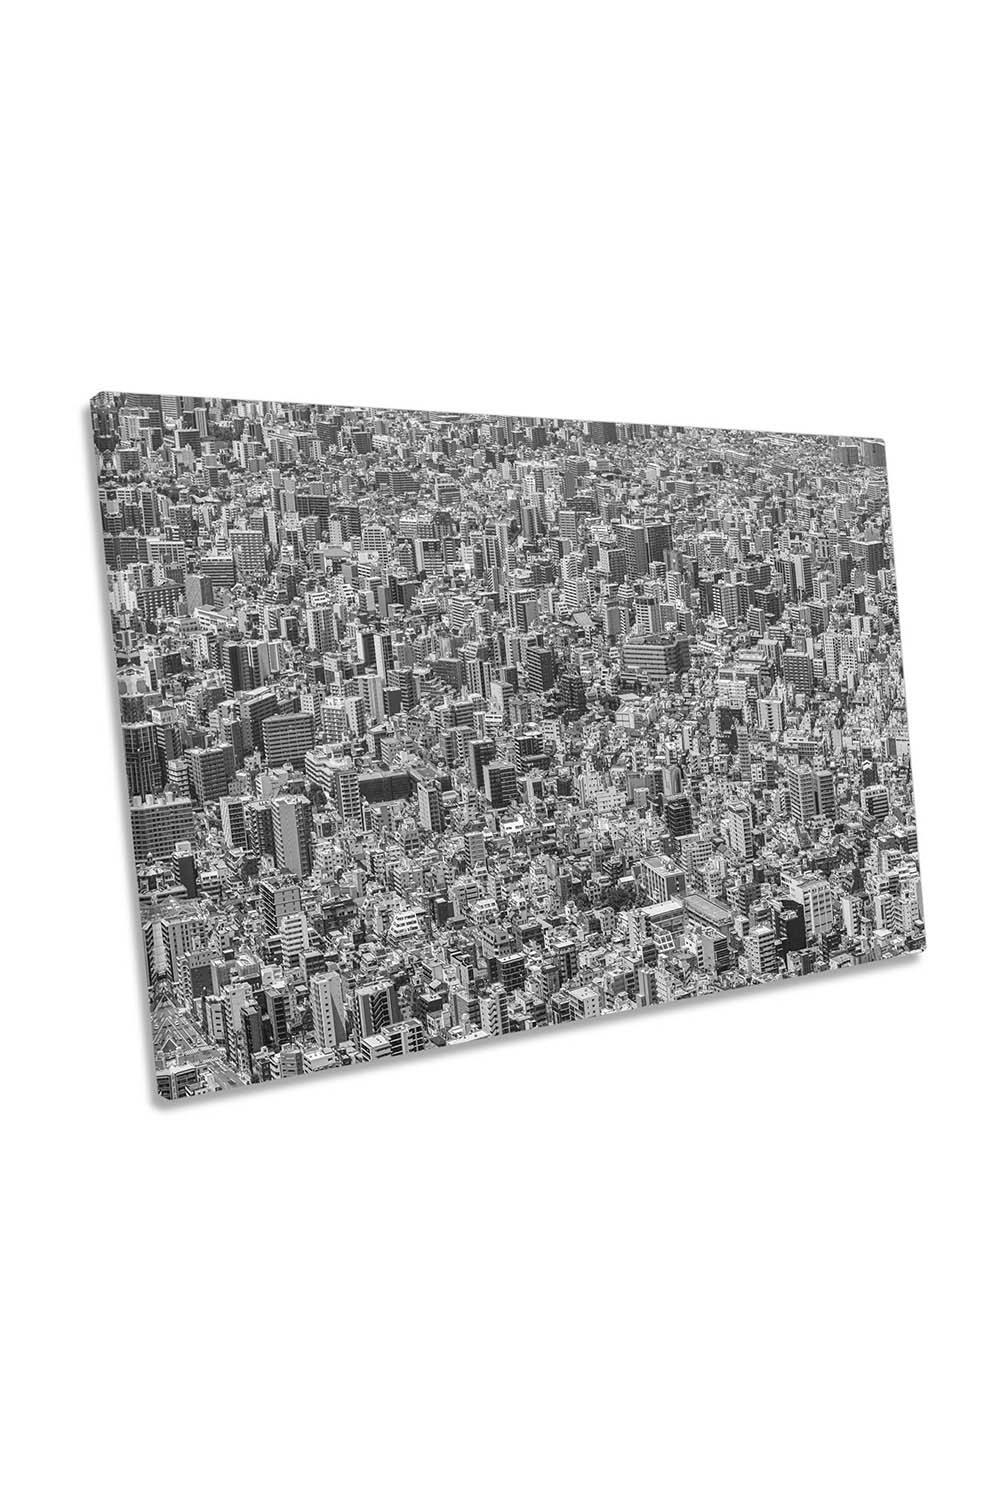 Tokyo Texture Skyline Buildings City Asia Canvas Wall Art Picture Print